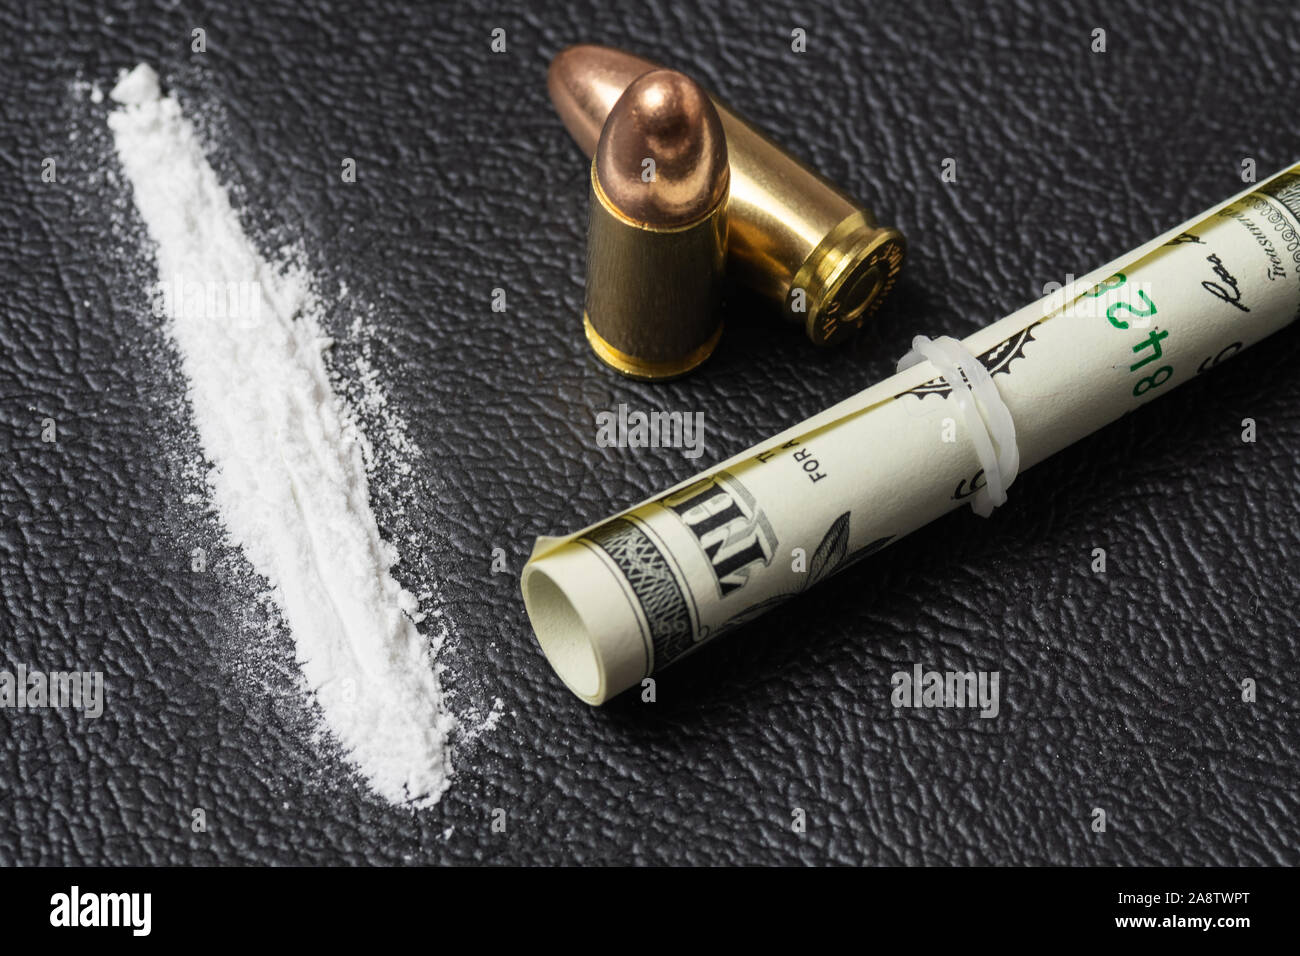 Dollar bill scroll, cocaine powder and two 9 mm bullets on black surface. Conceptual mockup of illegal drug dealing, trafficking, war on drugs. Stock Photo